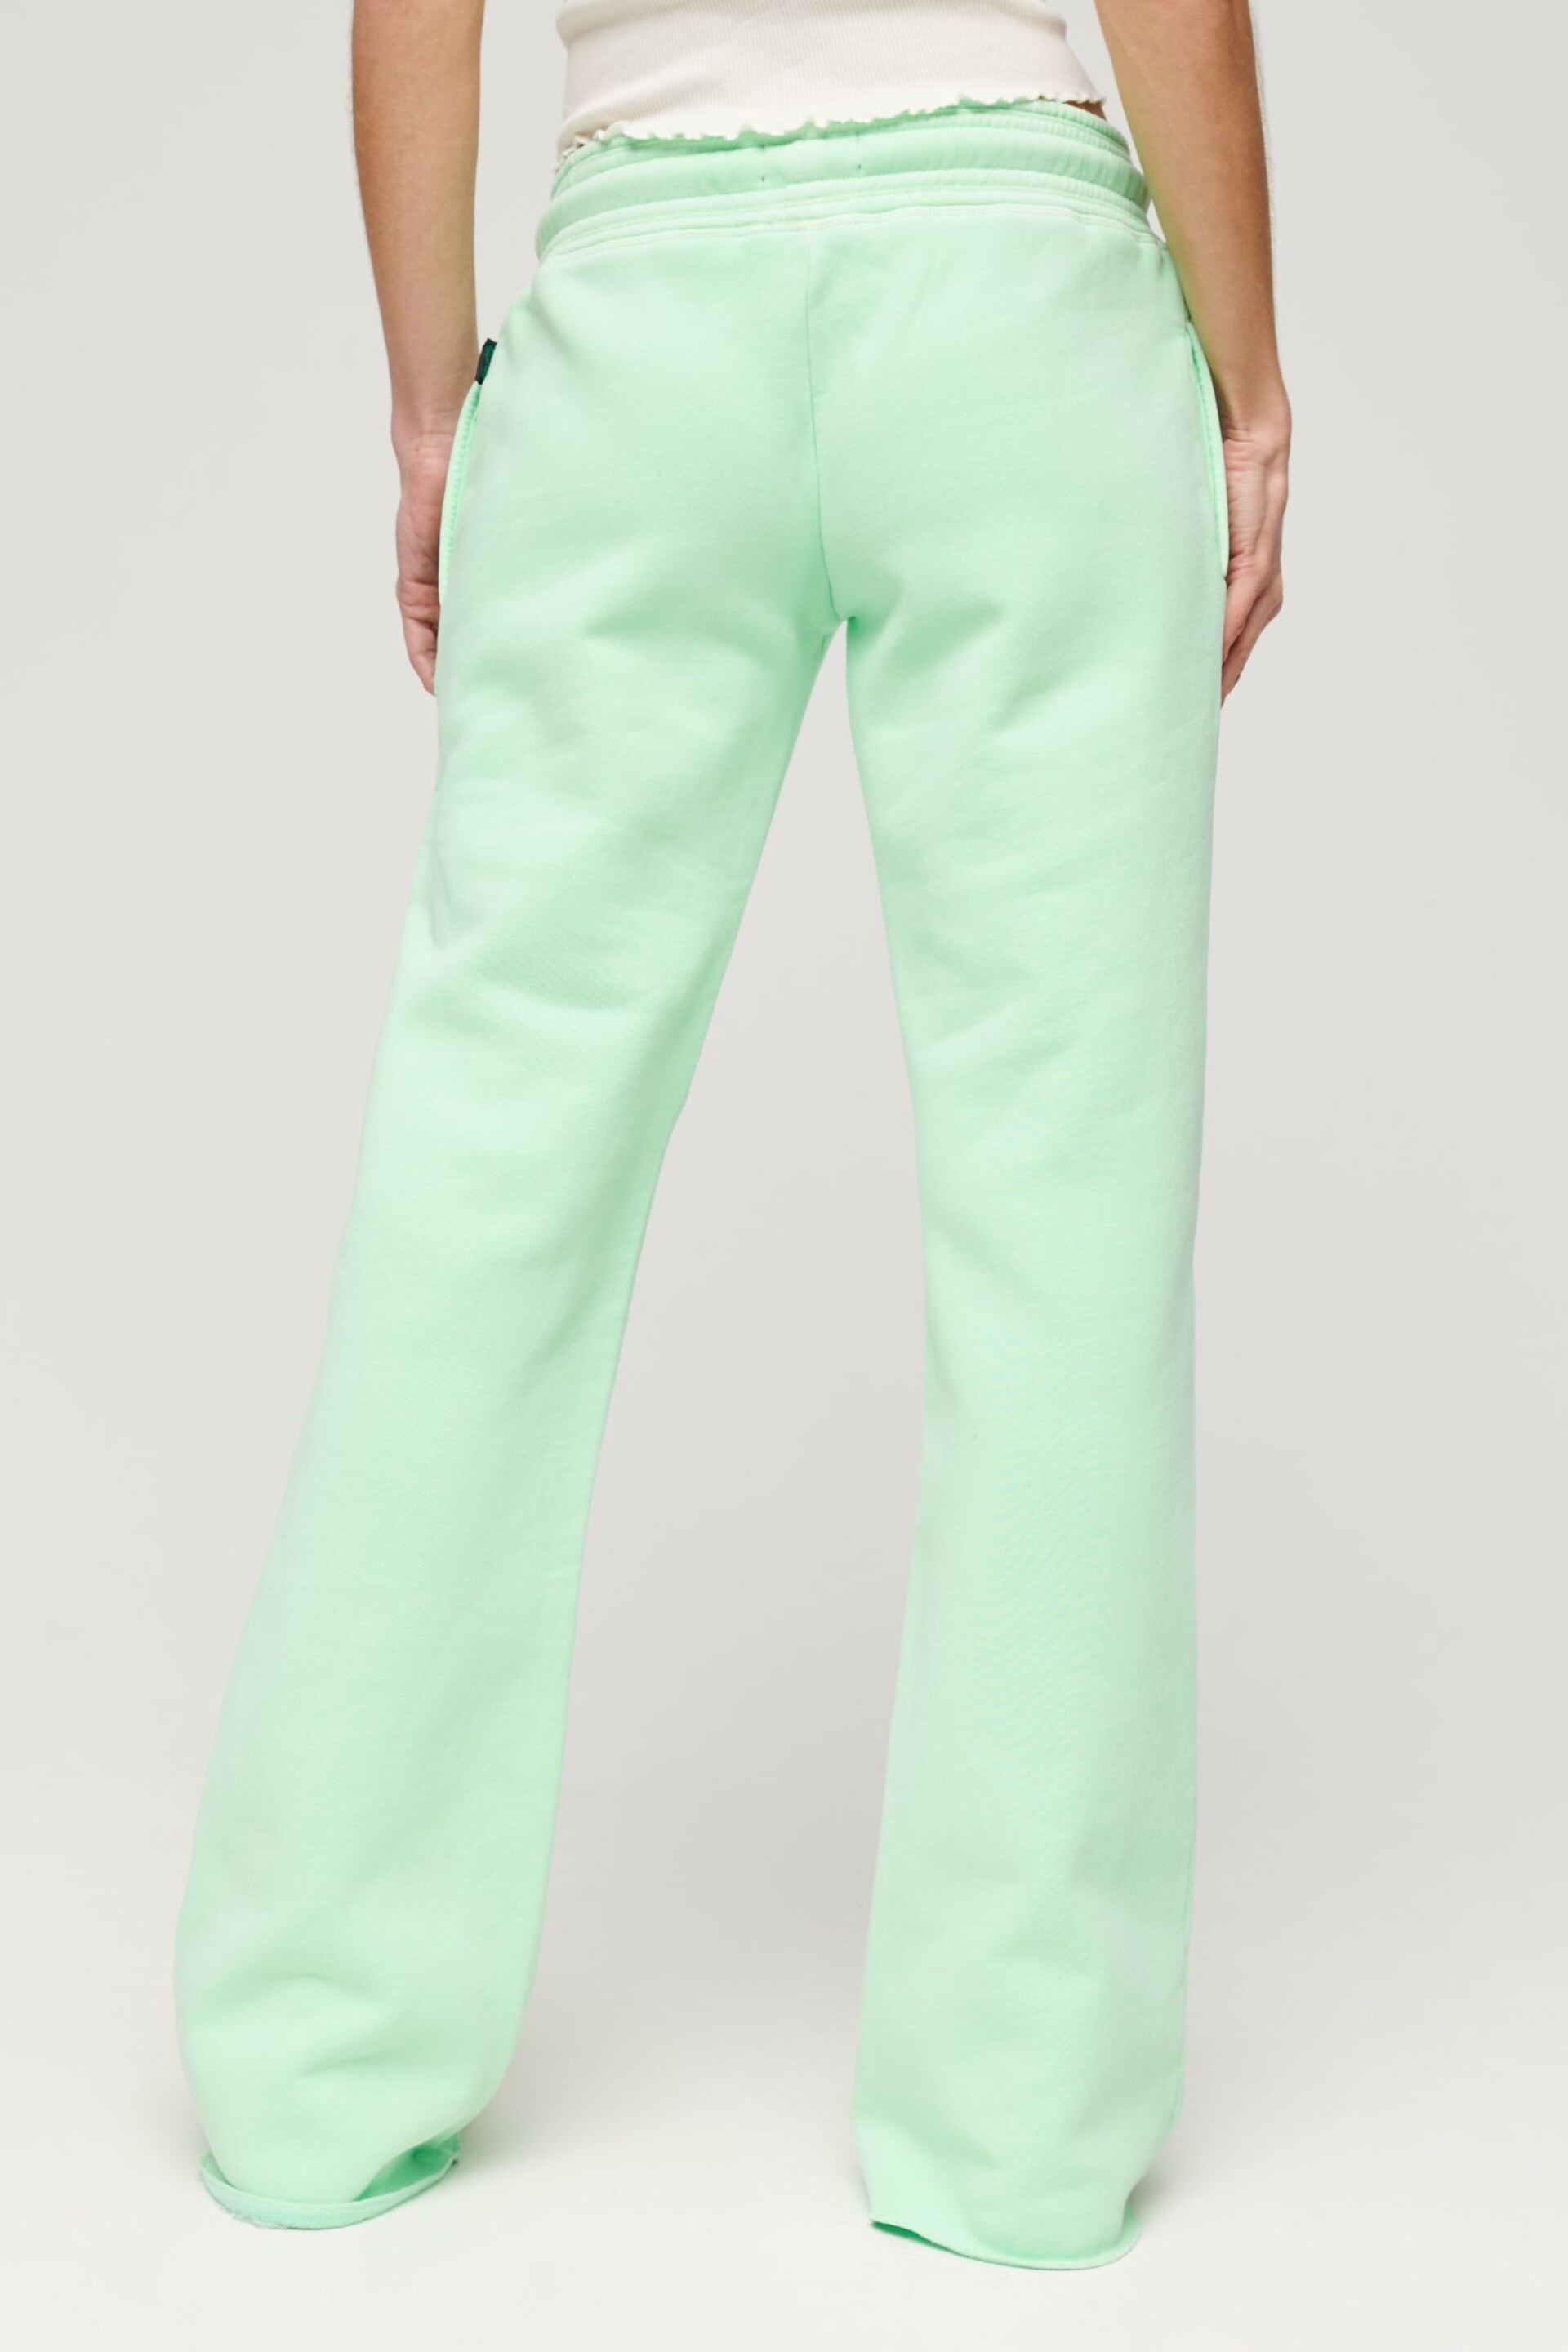 Superdry Green Neon Vintage Logo Low Rise Flare Joggers - Image 2 of 4